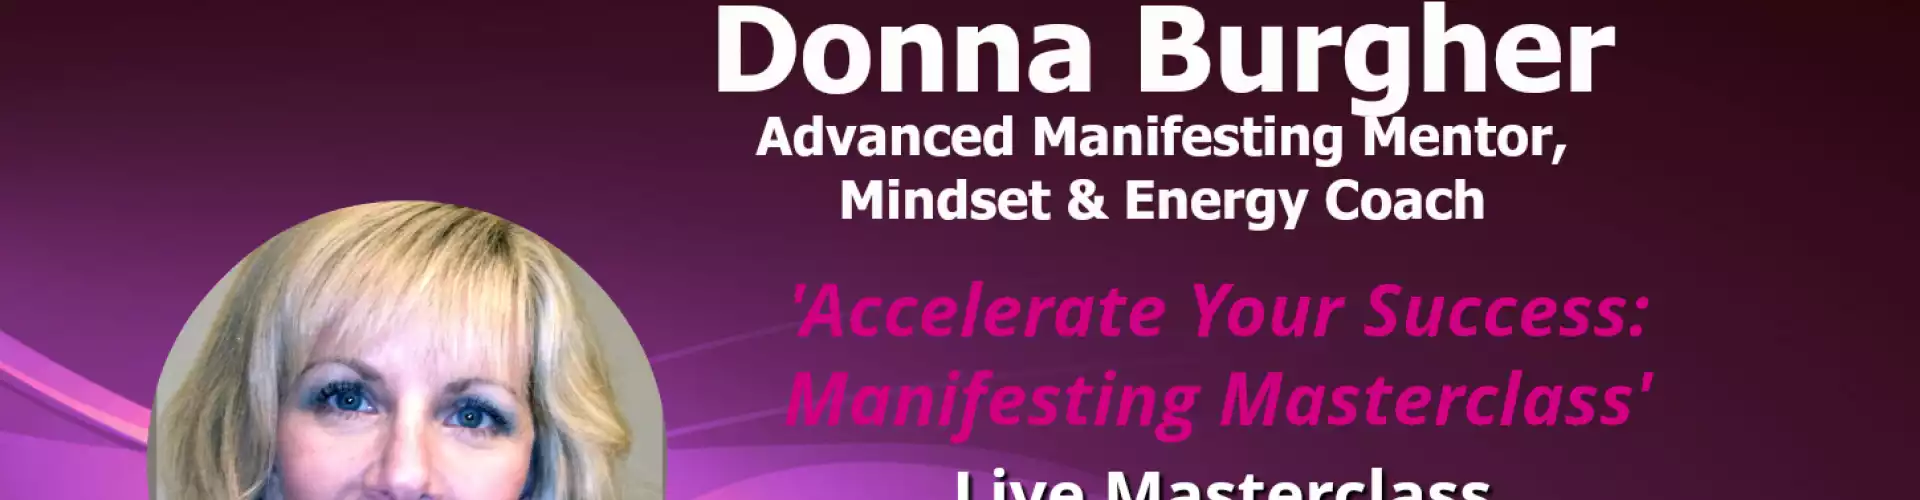 WU Expert Series w Donna Burgher Accelerate Your Success: Manifesting Masterclass